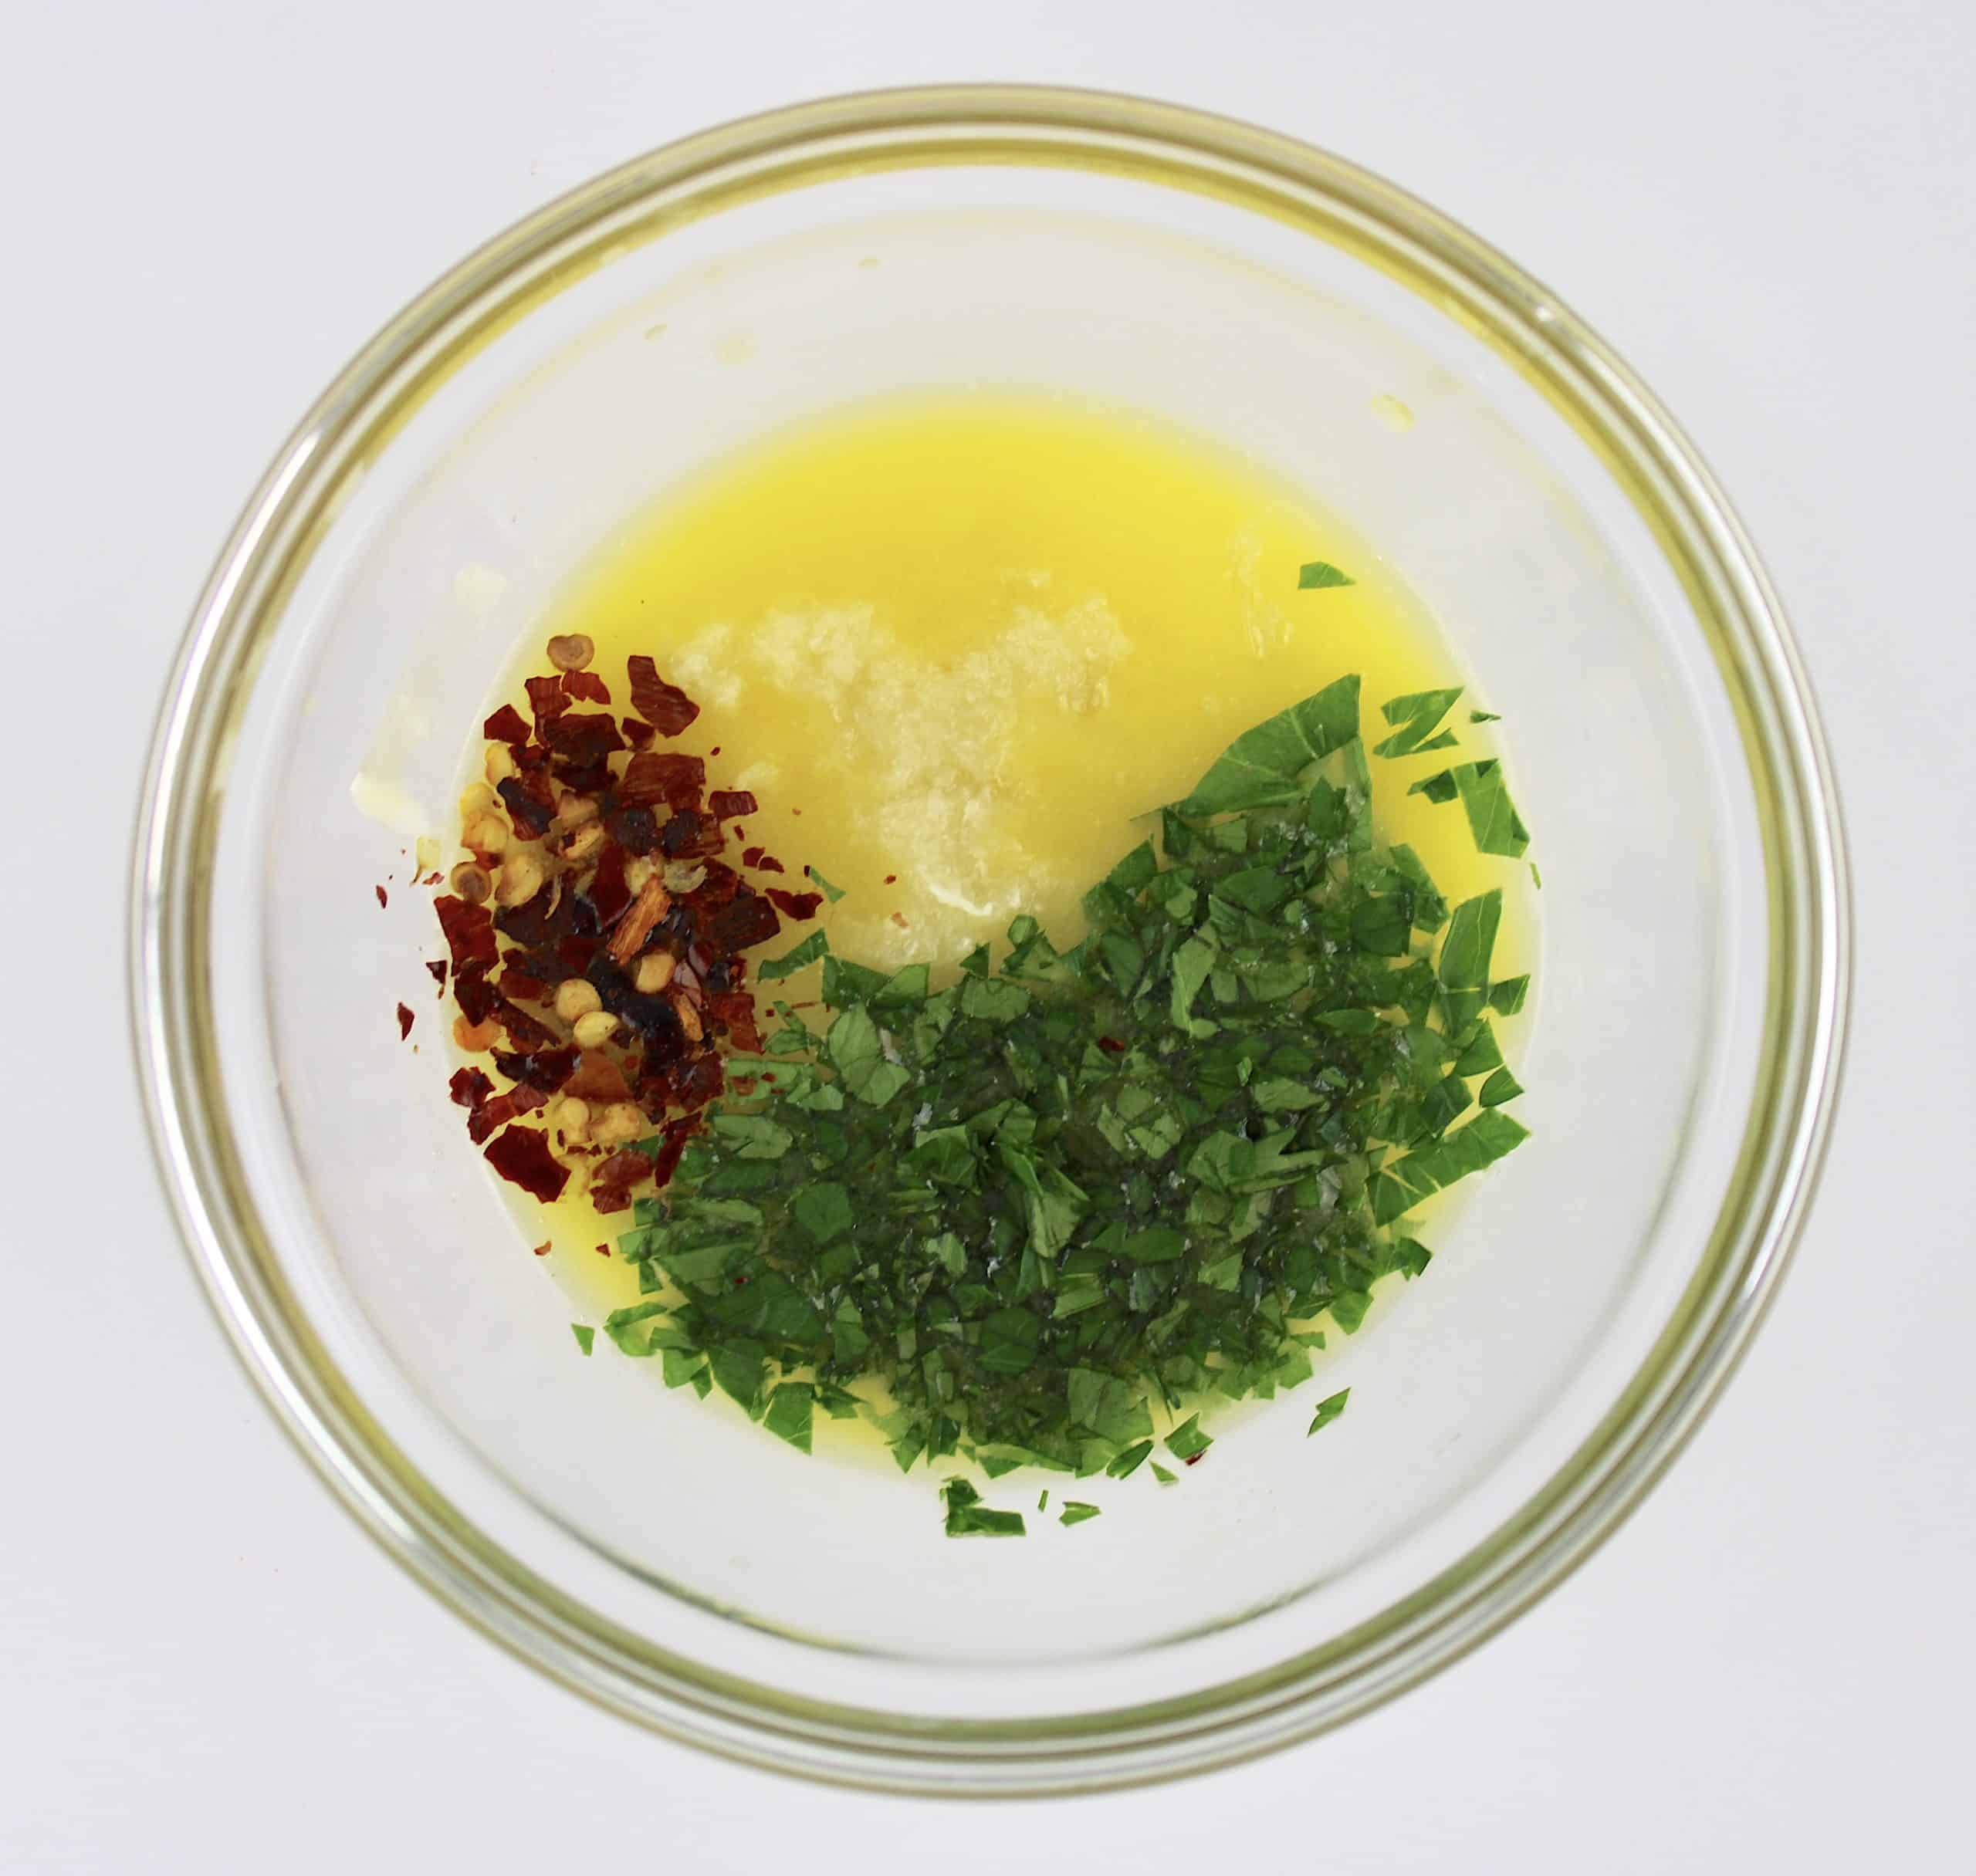 melted butter garlic parsley and red pepper flakes in glass bowl